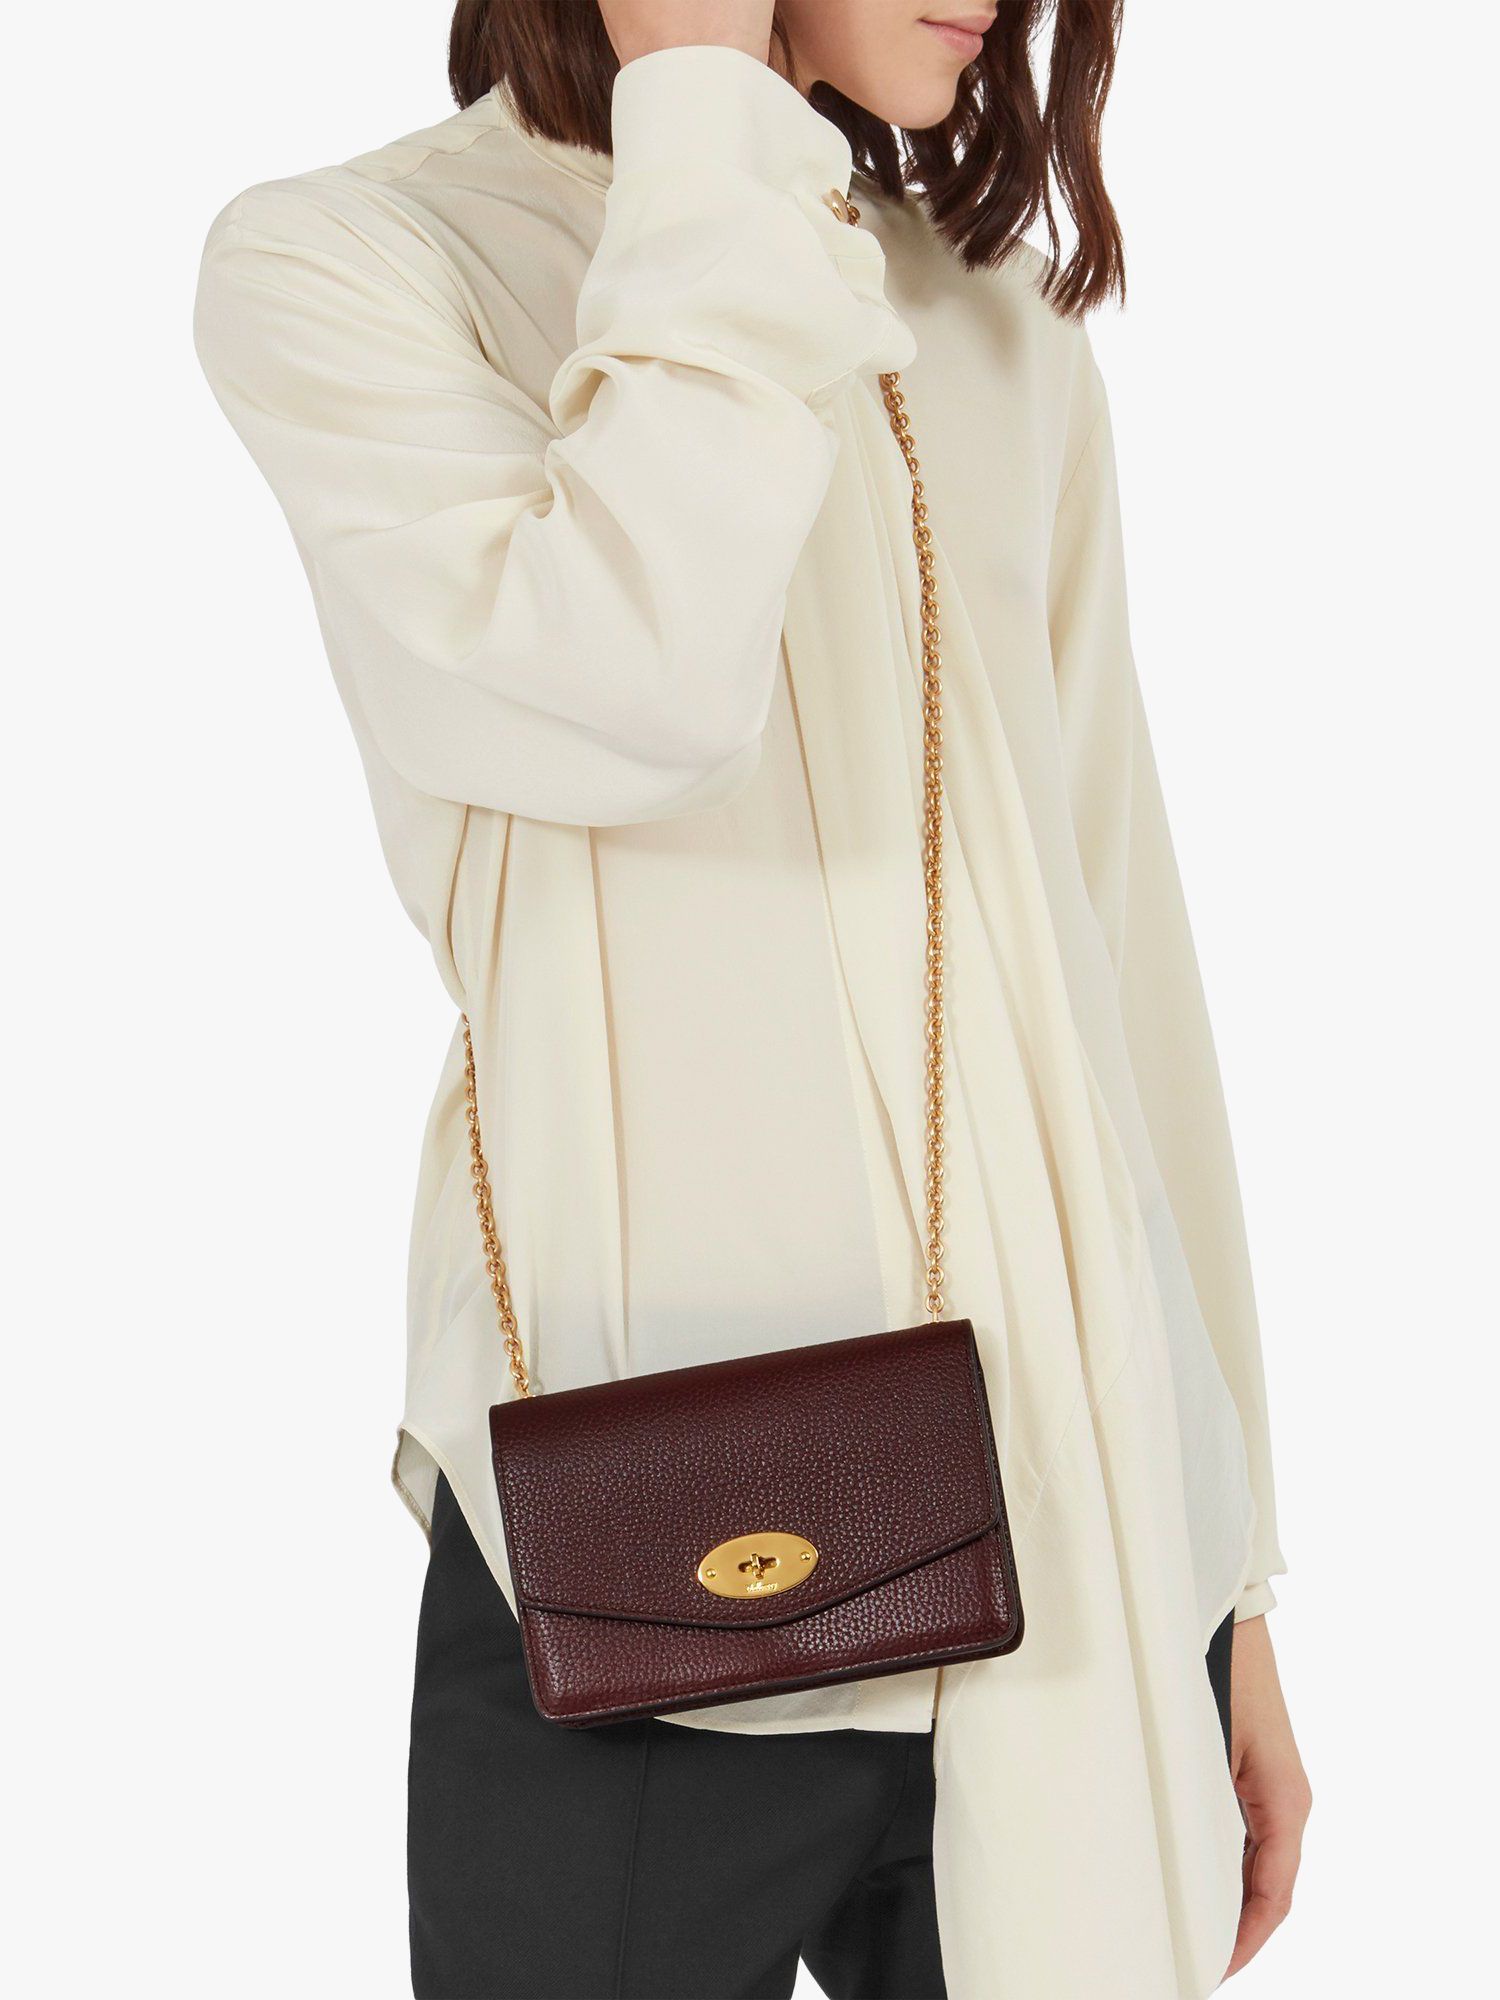 Mulberry Small Darley Leather Crossbody Bag